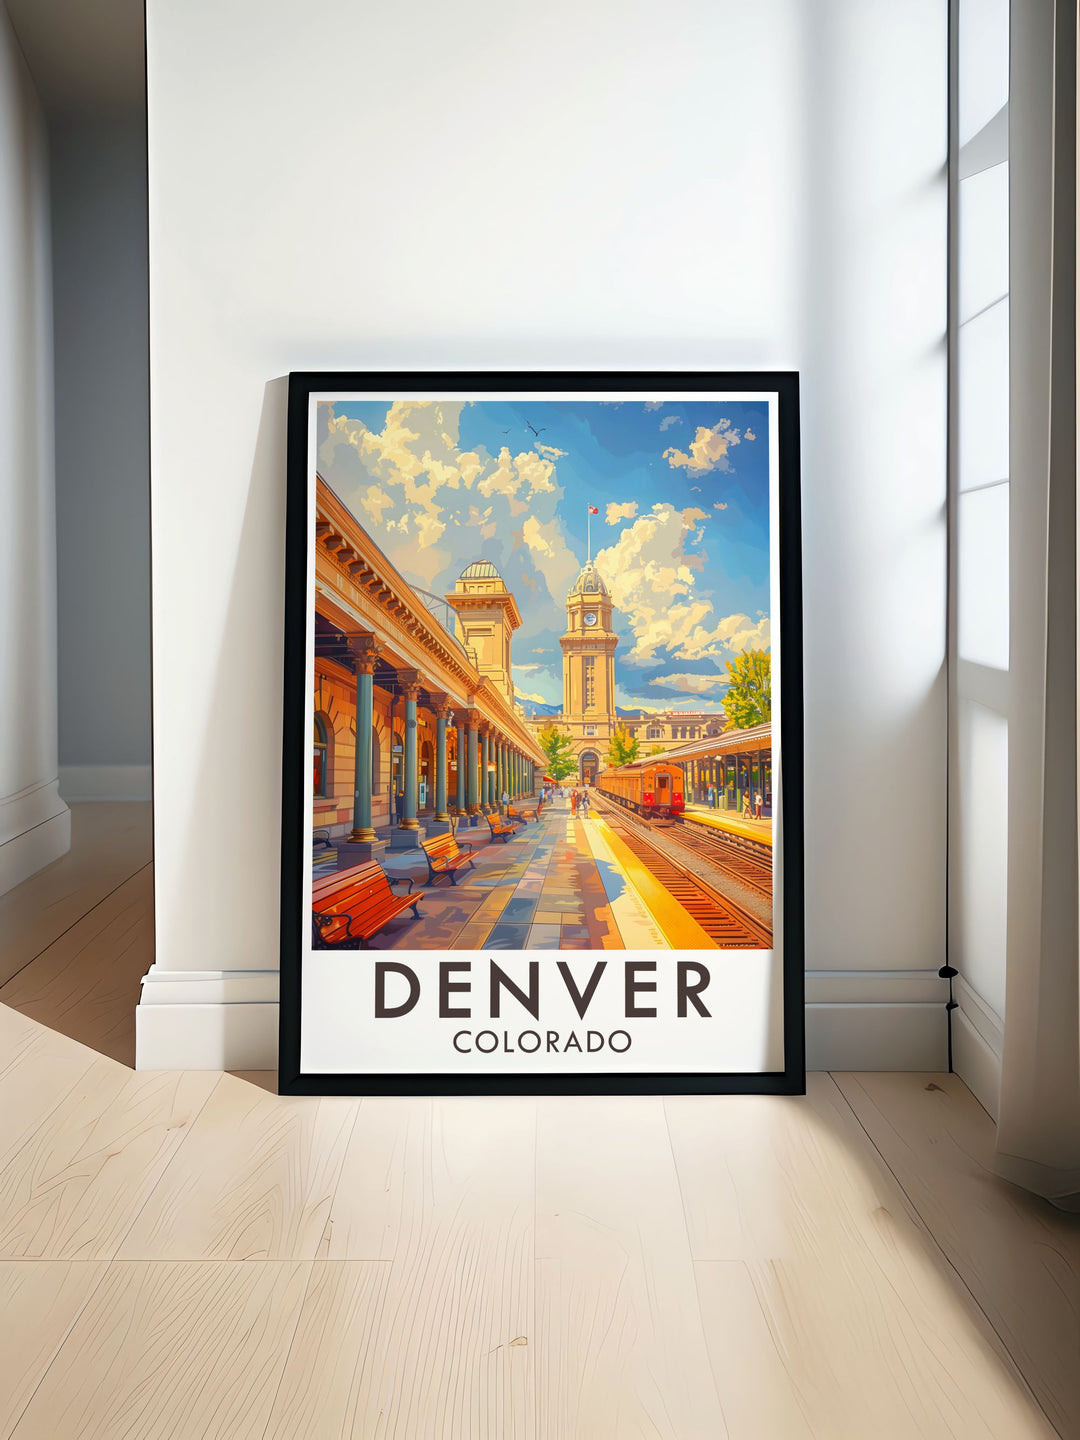 Boulder Colorado comes to life in this travel poster, featuring its vibrant downtown and breathtaking mountain views, perfect for adding a touch of natural beauty to your decor.